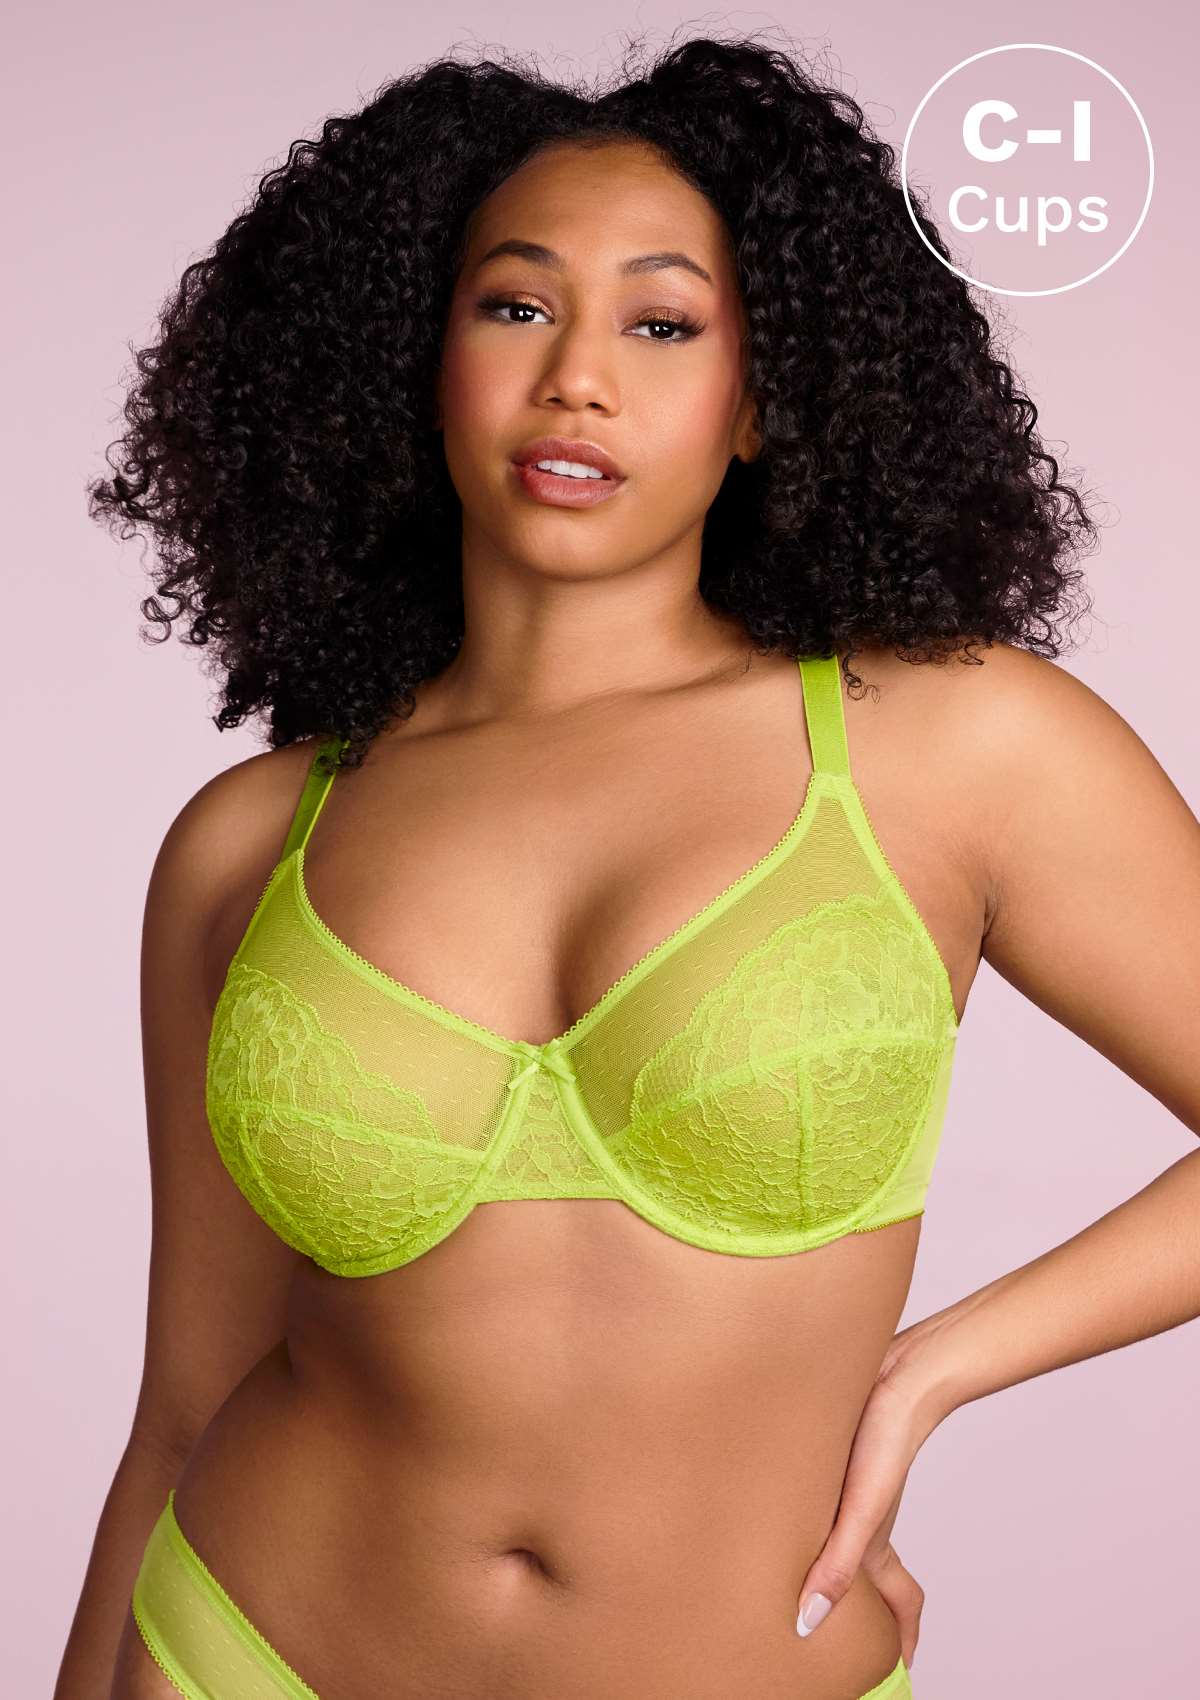 HSIA Enchante Full Cup Minimizing Bra: Supportive Unlined Lace Bra - Lime Green / 34 / H